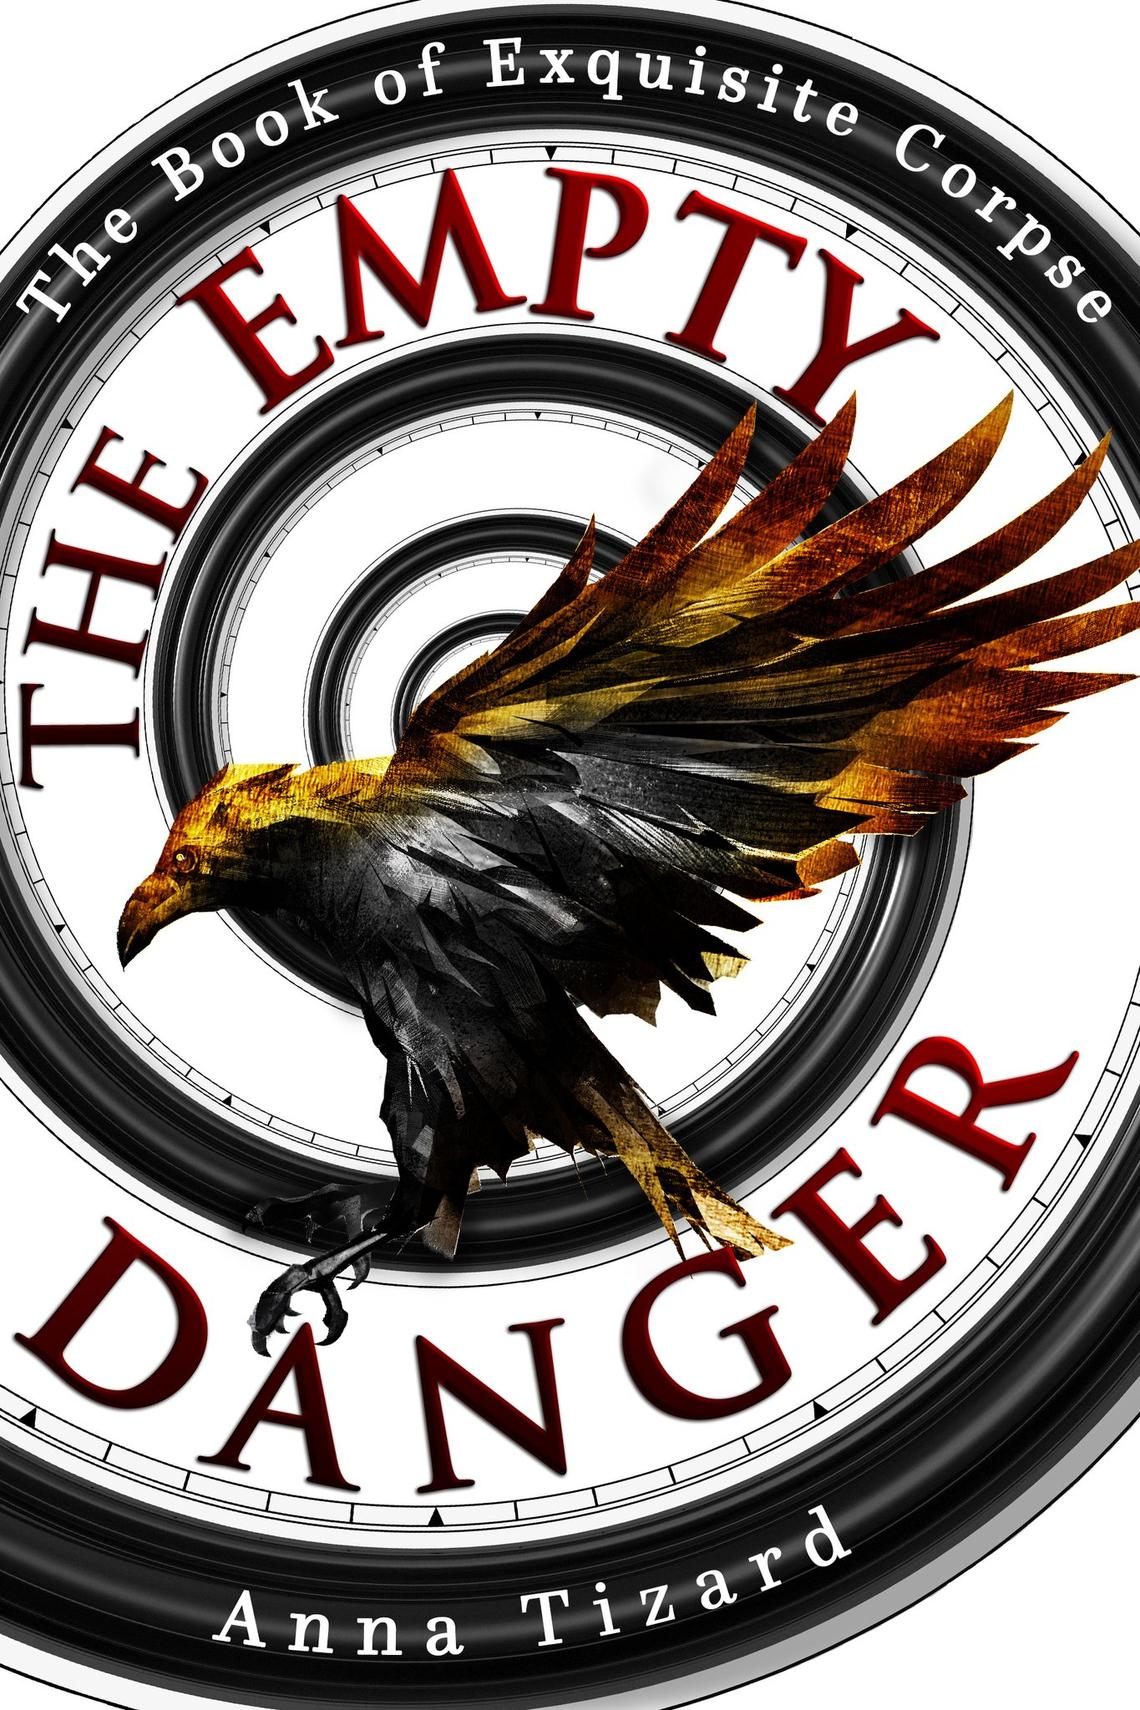 Image of cover of Anna Tizard's book, The Empty Danger